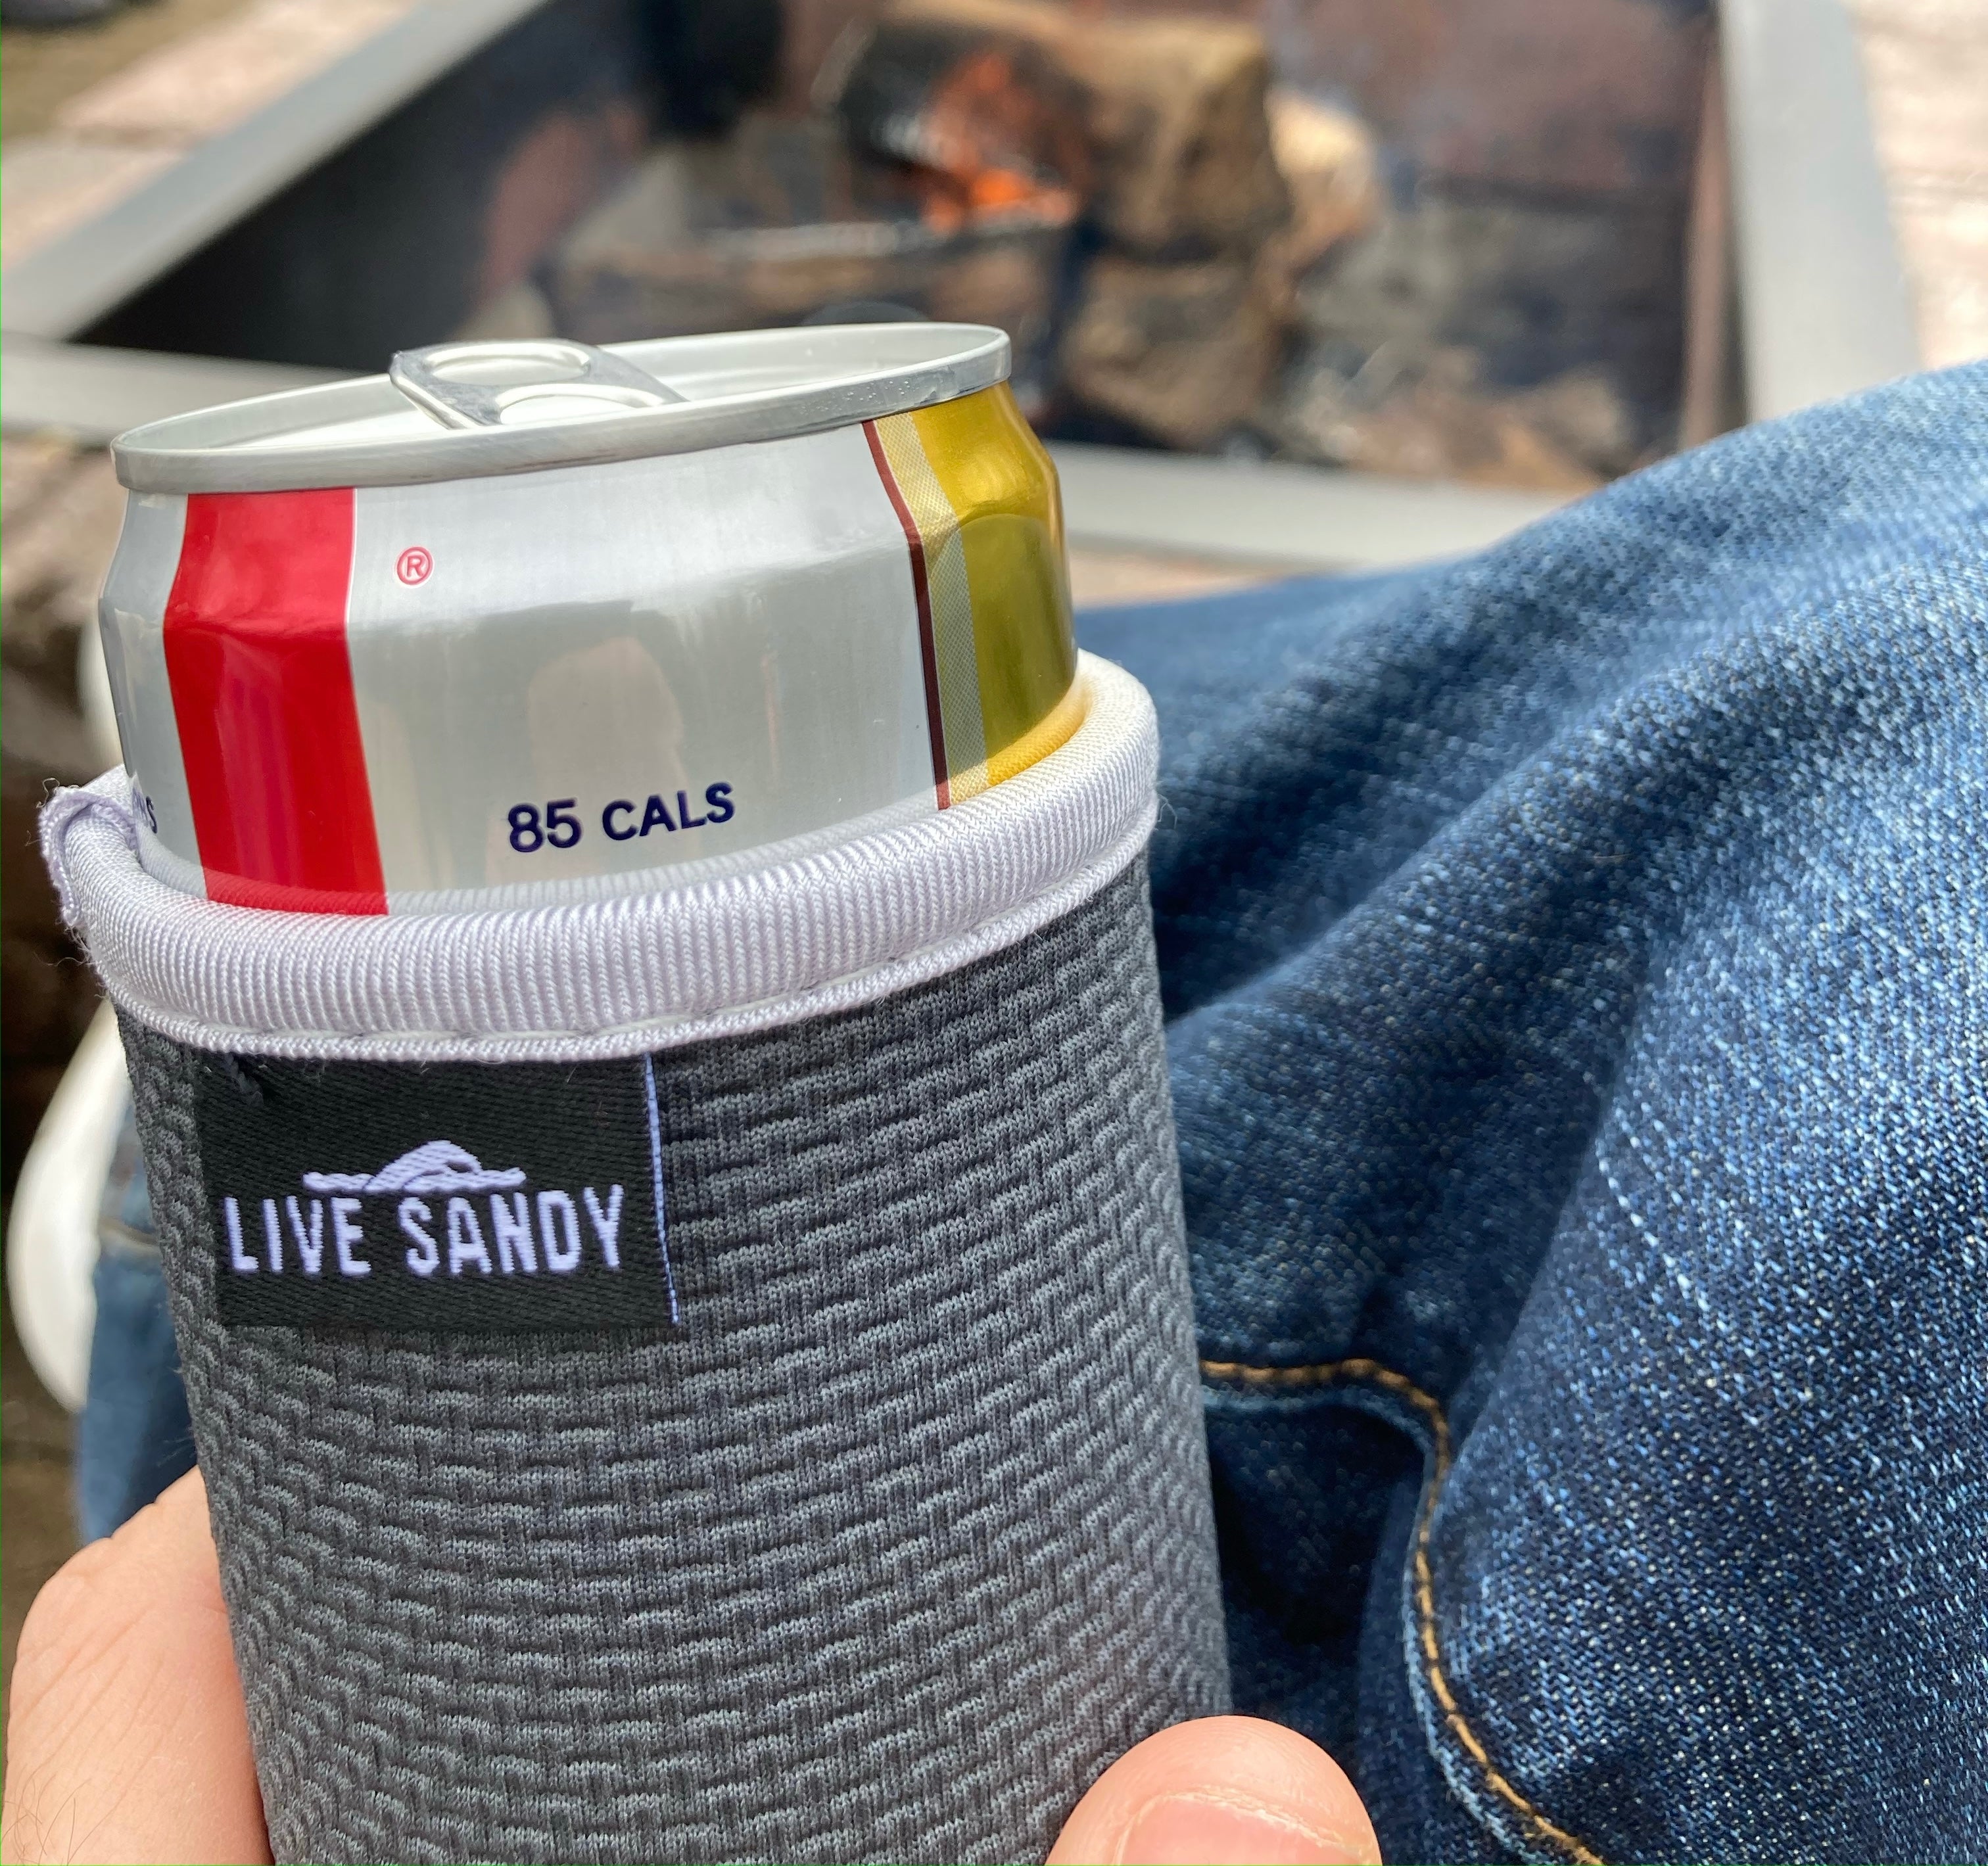 GO ASK YOUR DAD Collapsible Seltzer Koozie